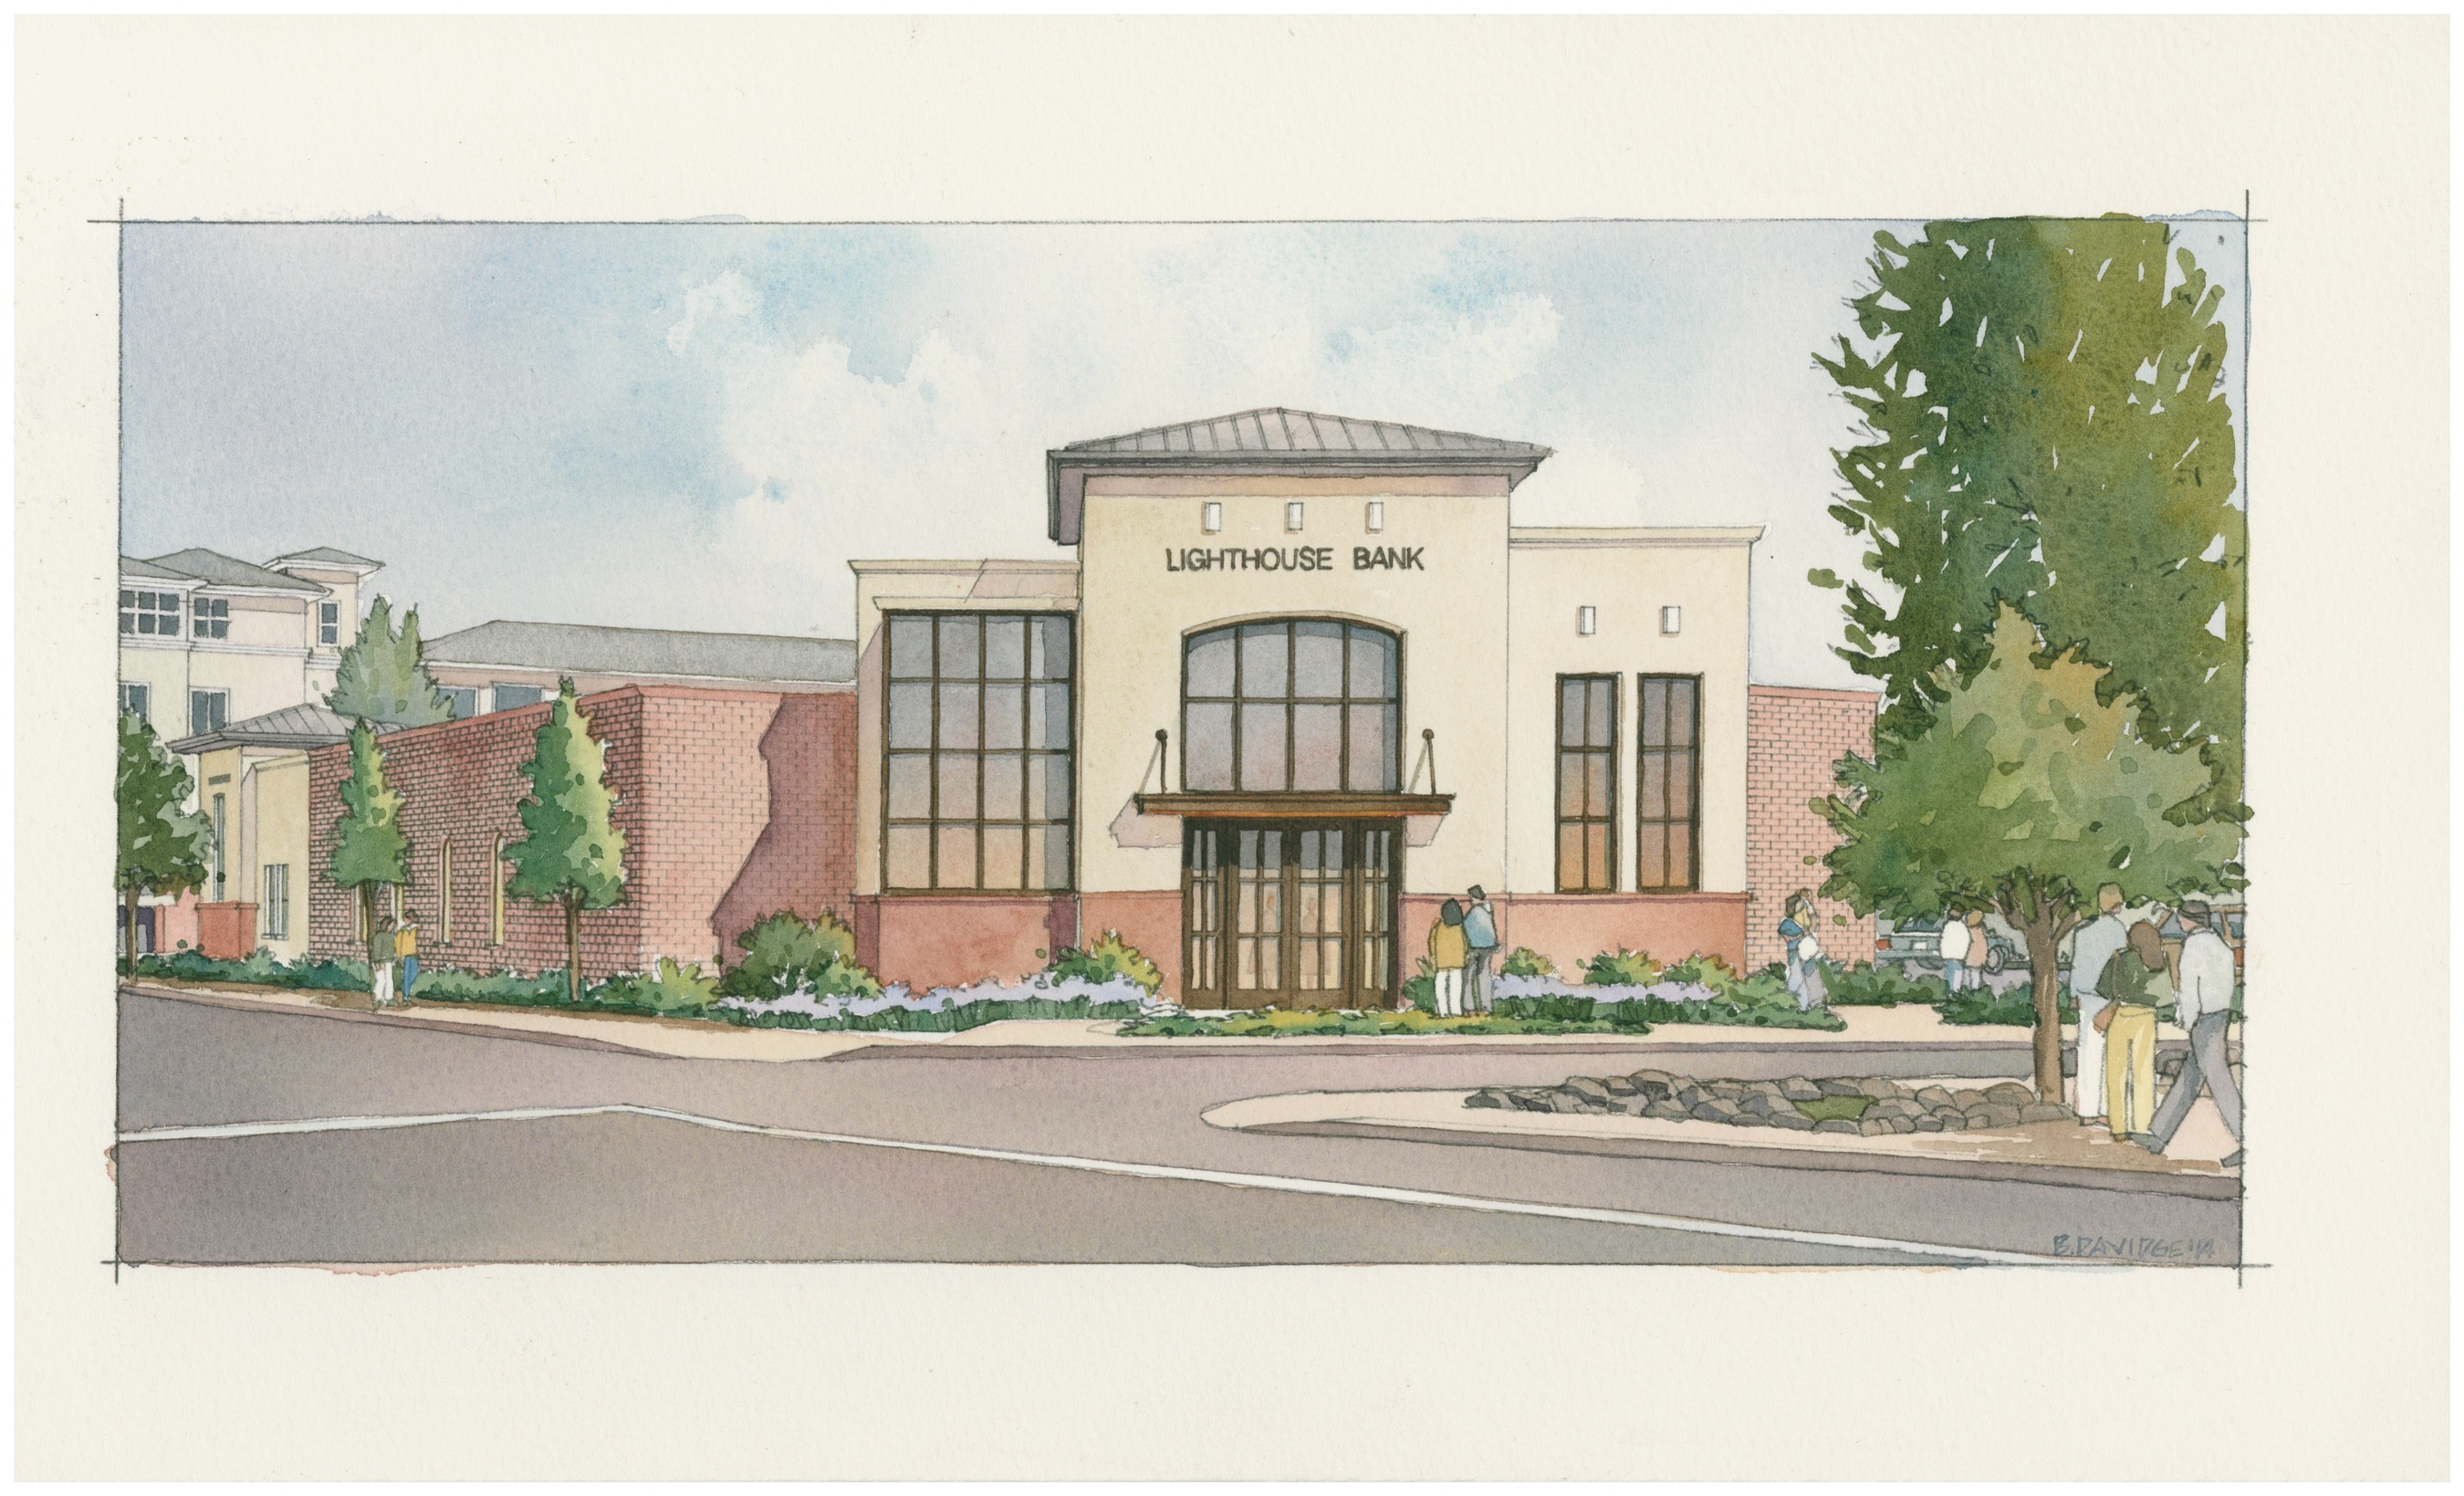 Artist's rendering of Lighthouse Bank's future headquarters located at 2020 N. Pacific Avenue, in downtown Santa Cruz, Calif. Site plans and improvements are underway and construction is anticipated to begin in early 2015. (PRNewsFoto/Lighthouse Bank)